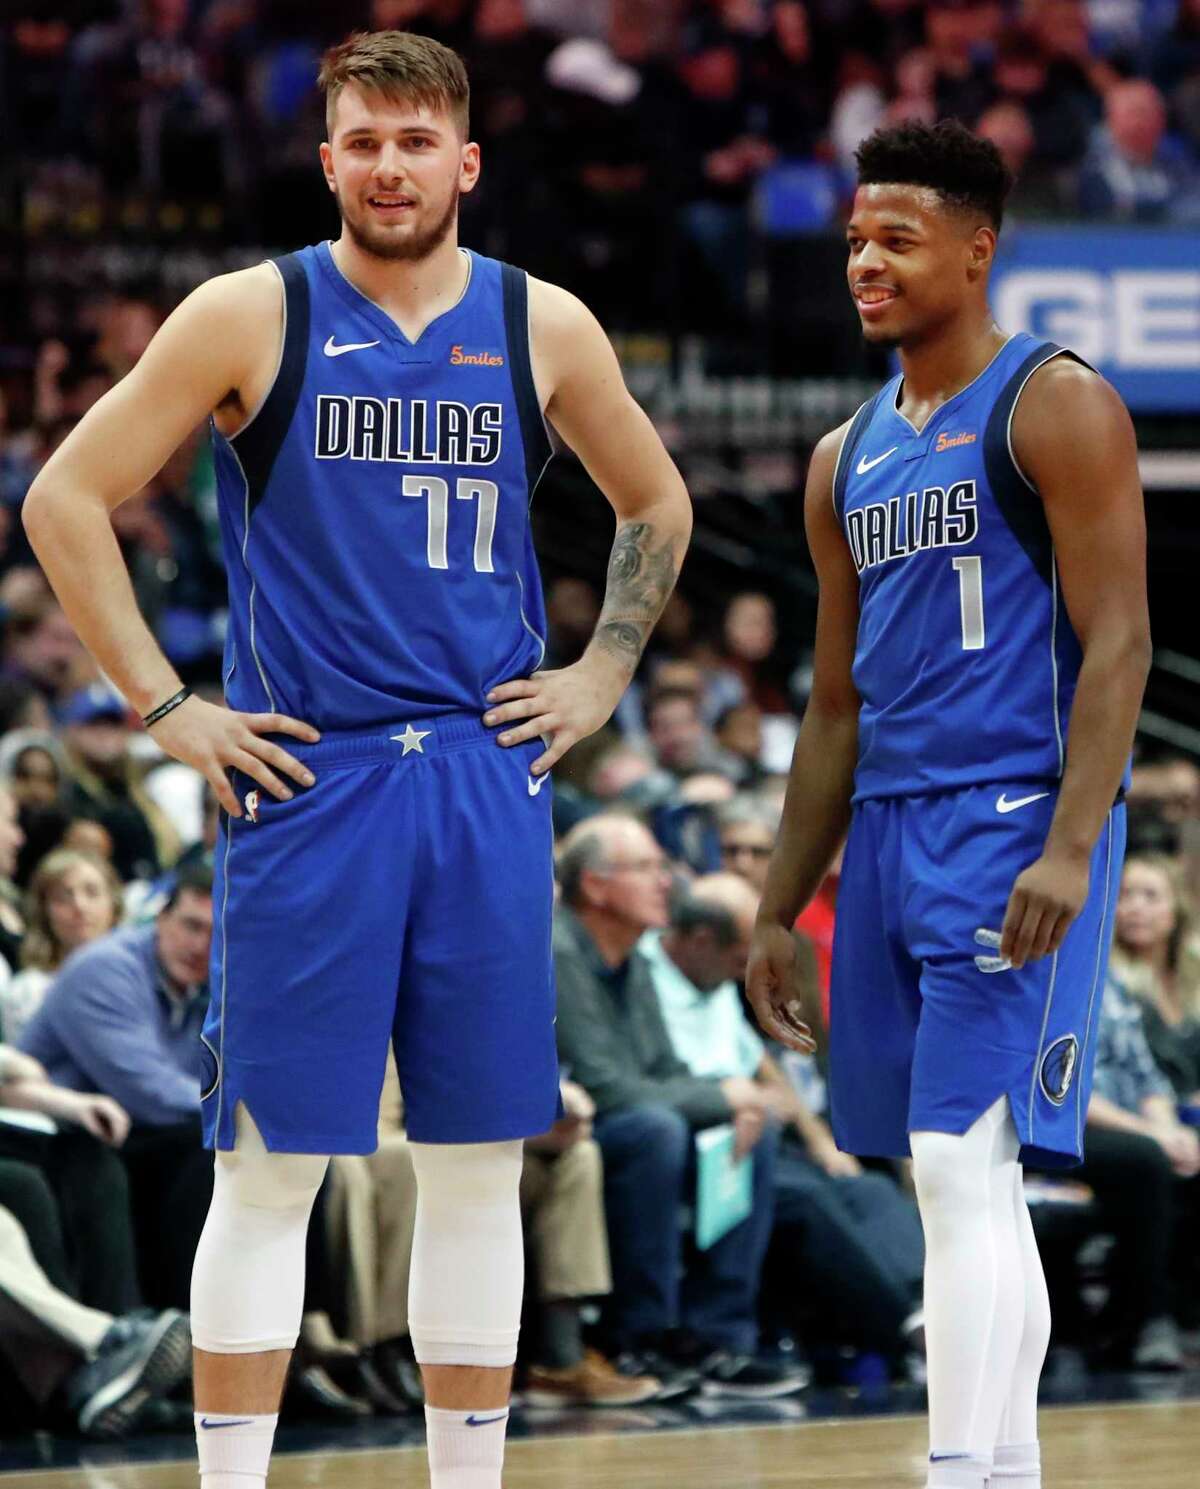 Dallas Mavericks Luka Doncic (77) of Germany and teammate Dennis Smith Jr. (1) share a laugh during the first half of an NBA basketball game against the LA Clippers in Dallas, Tuesday, Jan. 22, 2019. (AP Photo/LM Otero)